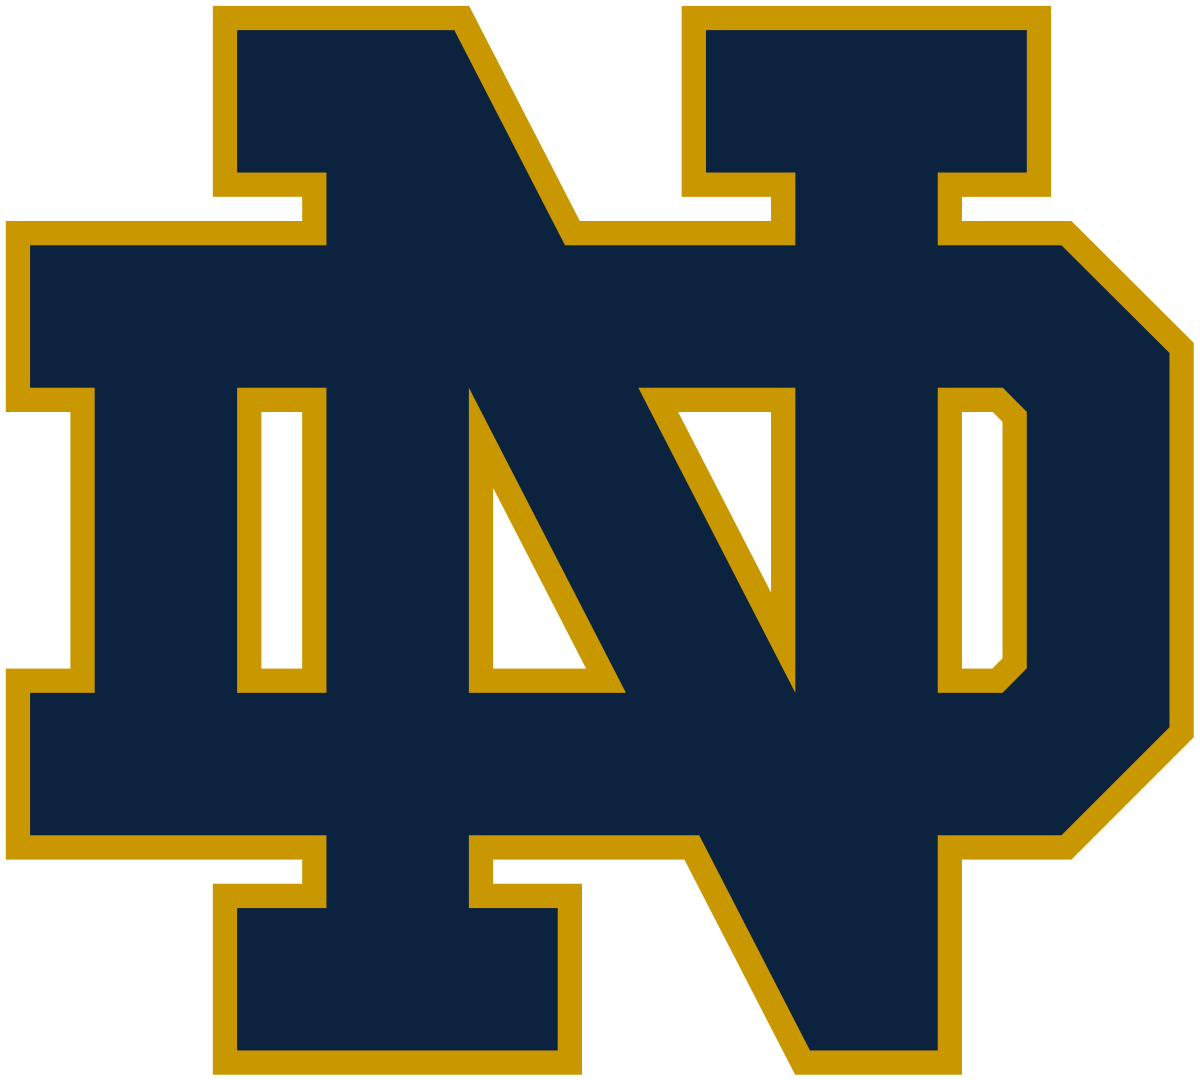 New Notre Dame Basketball head coach talks about plans, excited for